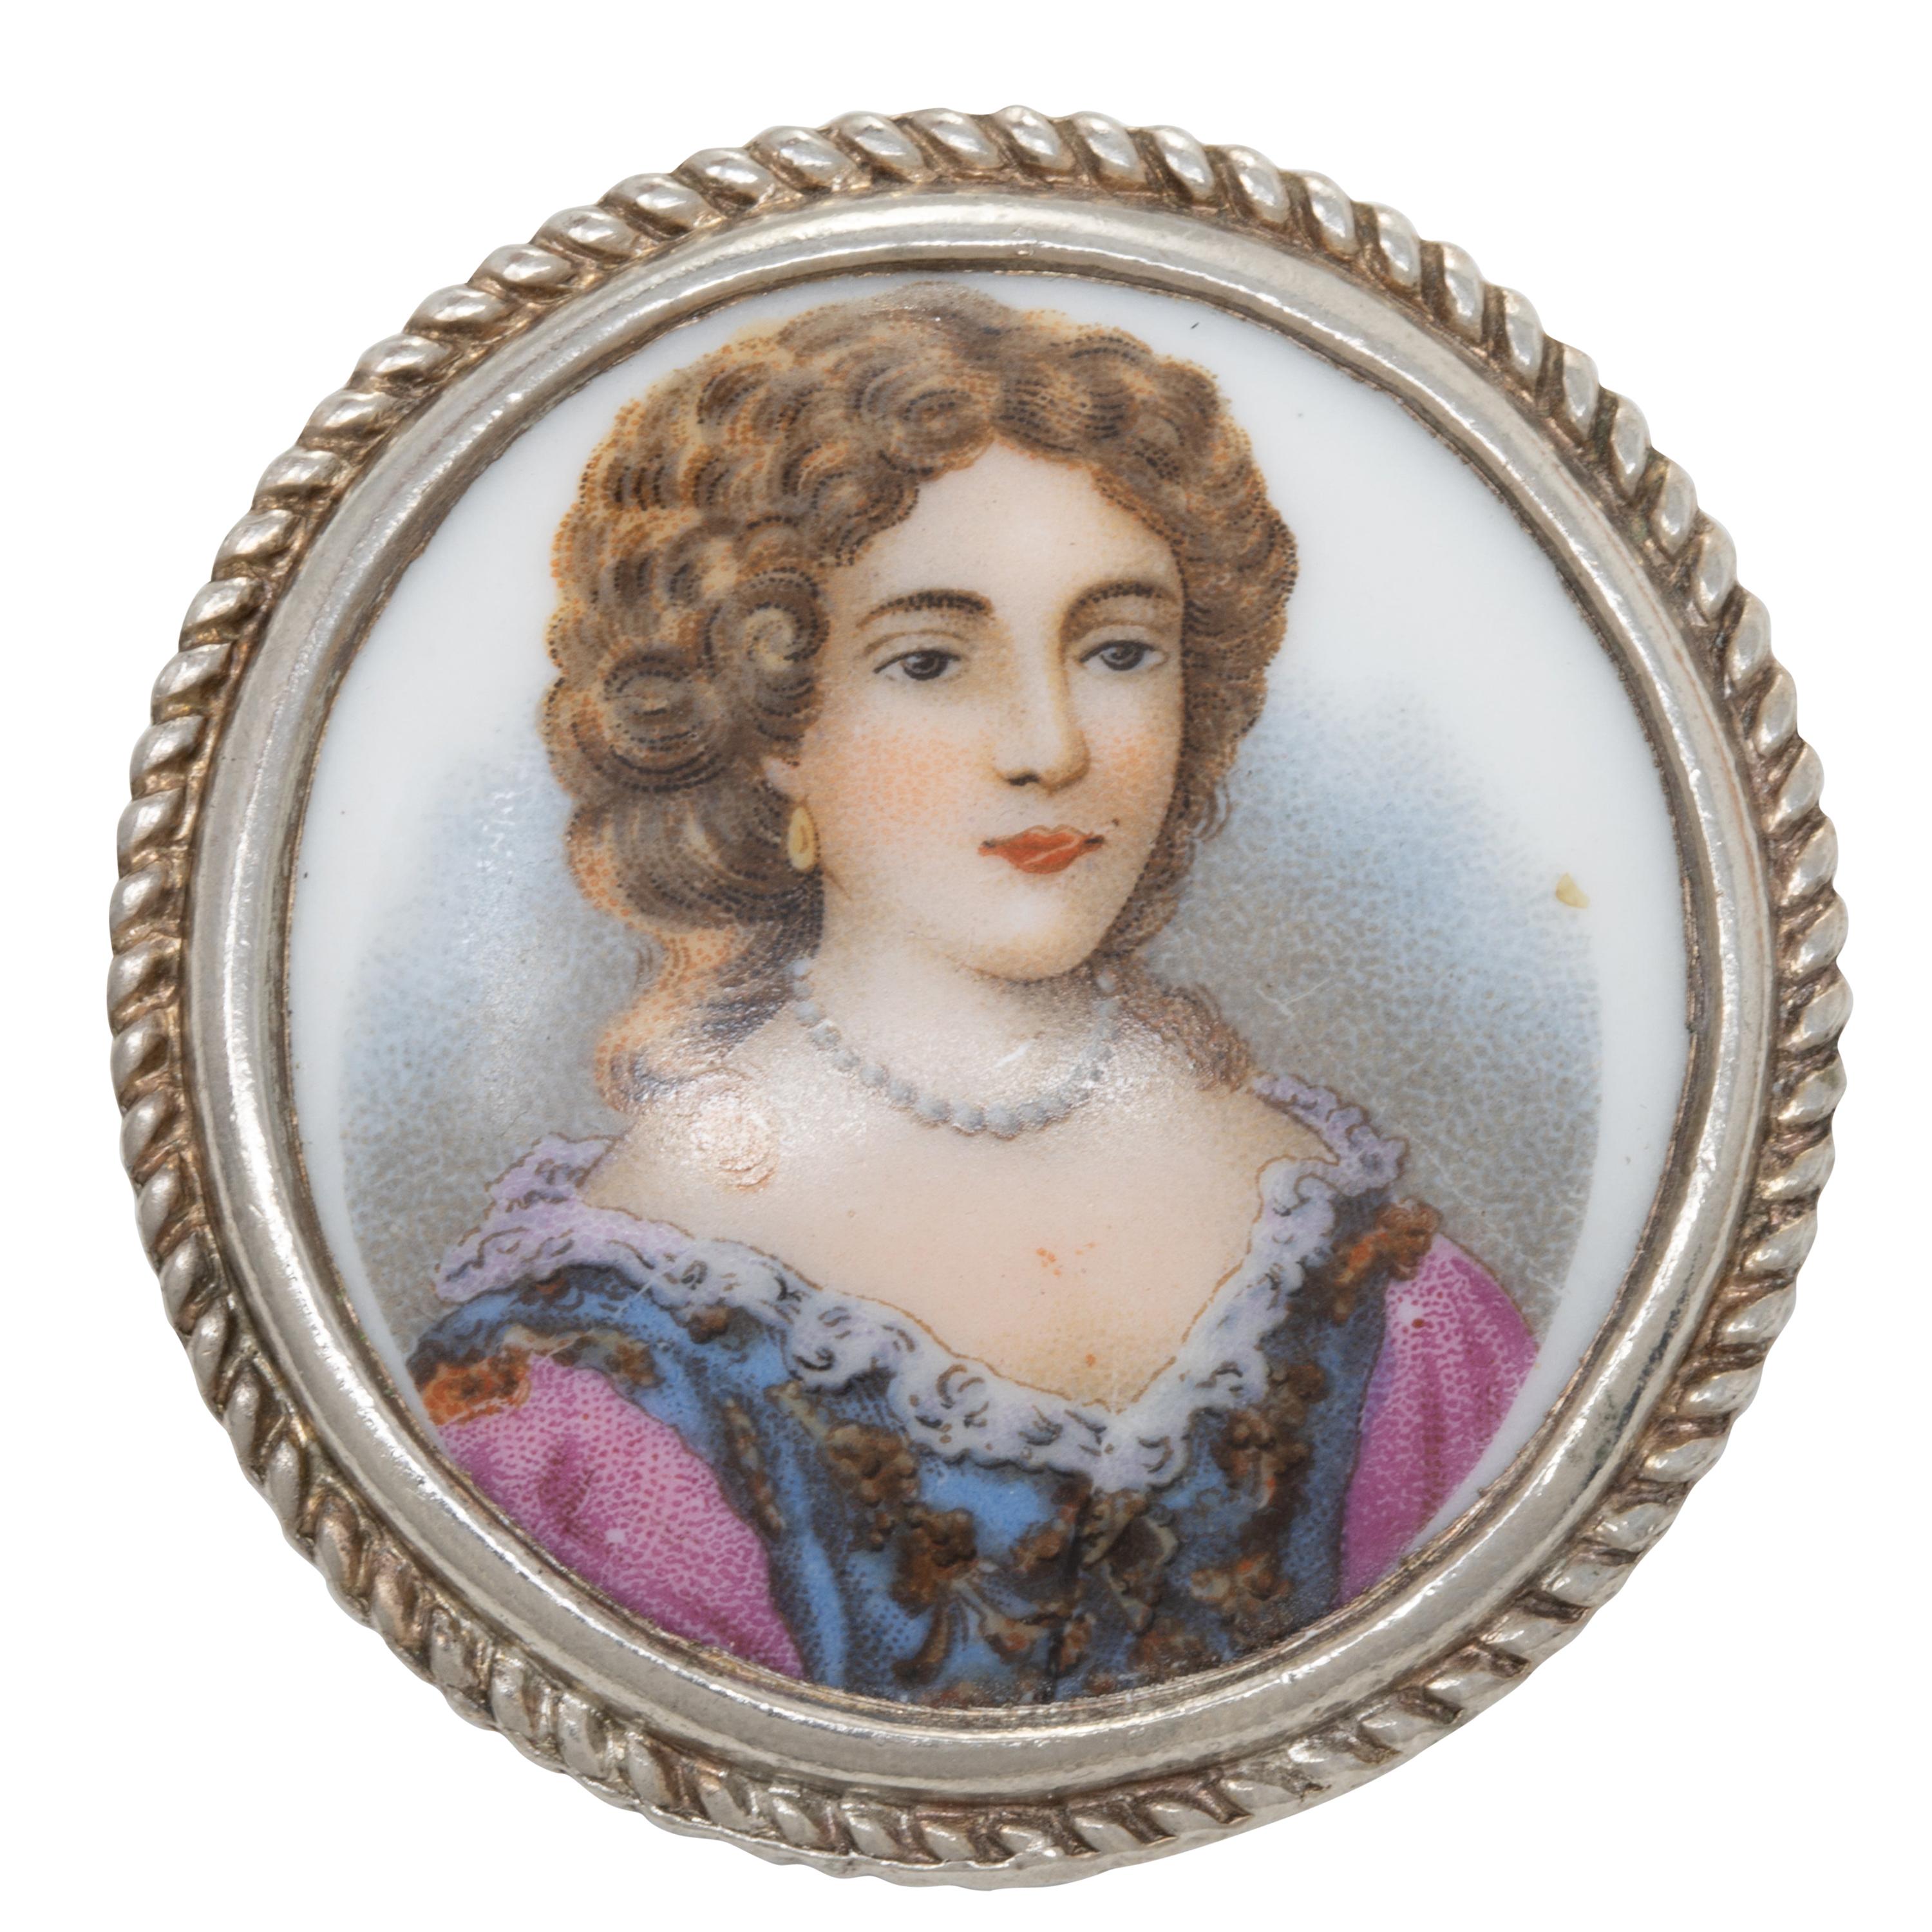 French Painted Woman Portrait Round Pin Pendant in Silver Setting, Mid 1900s